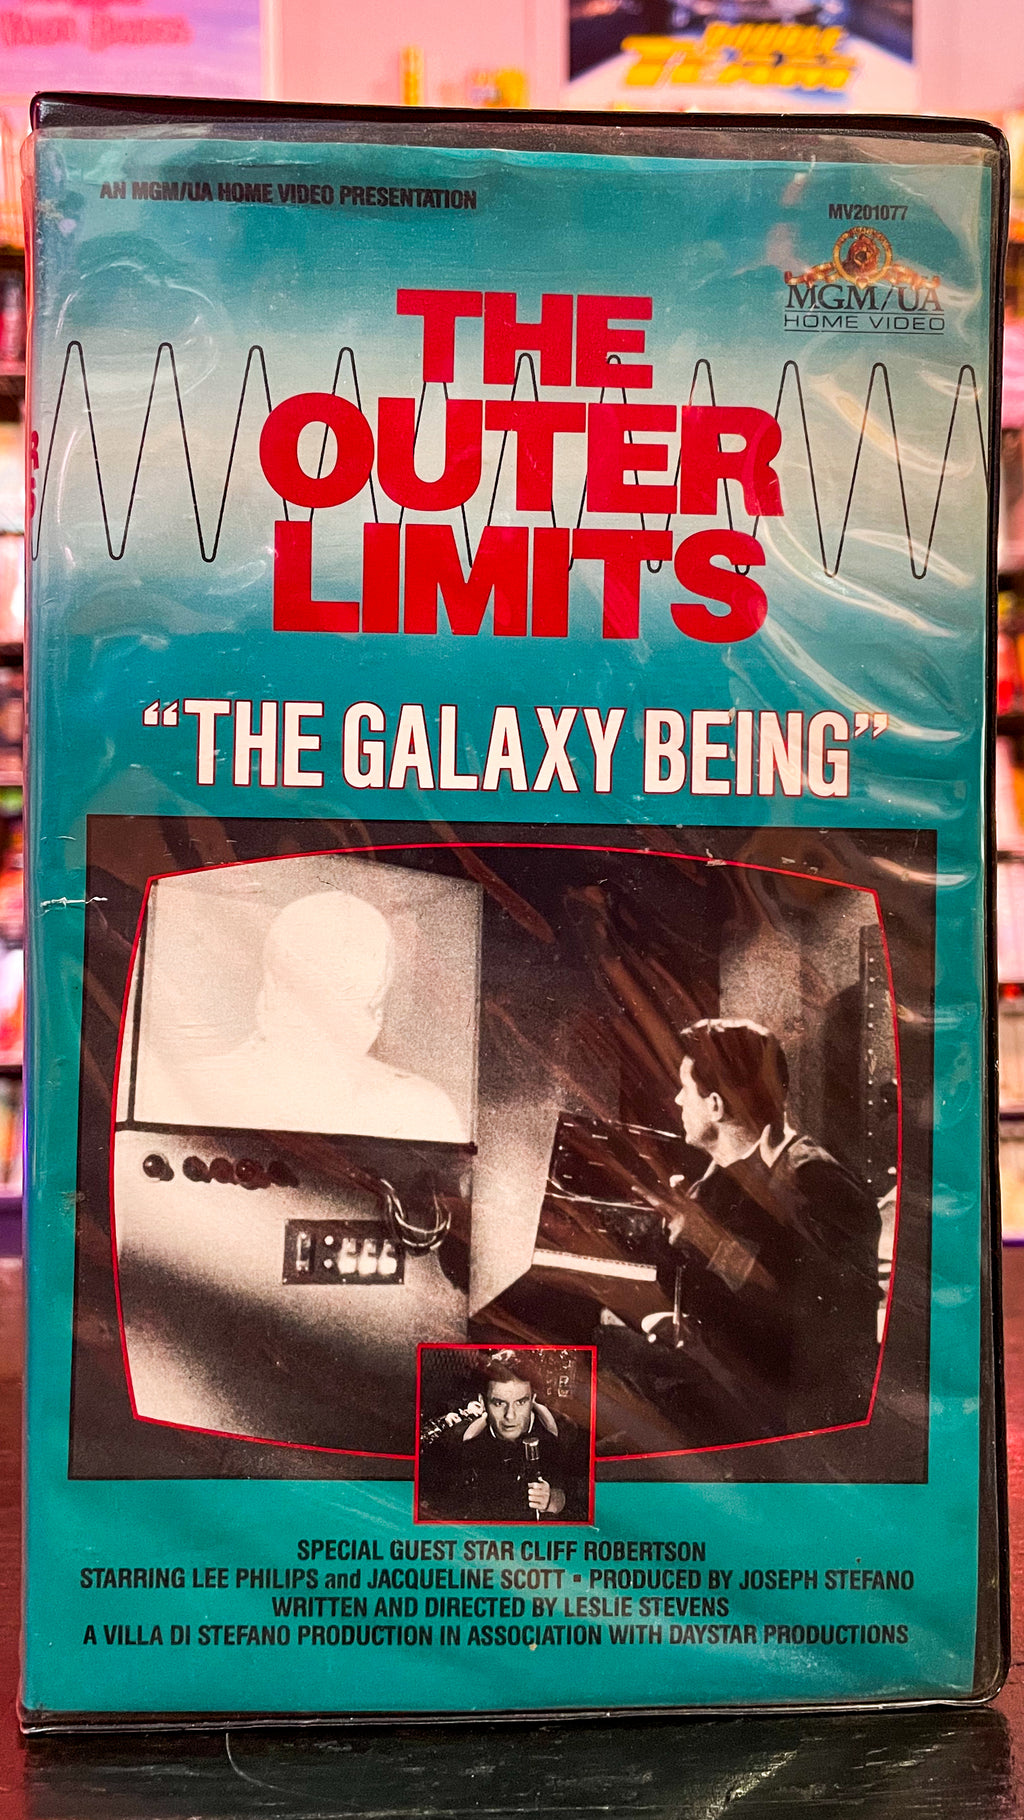 The Outer Limits: "The Galaxy Being"